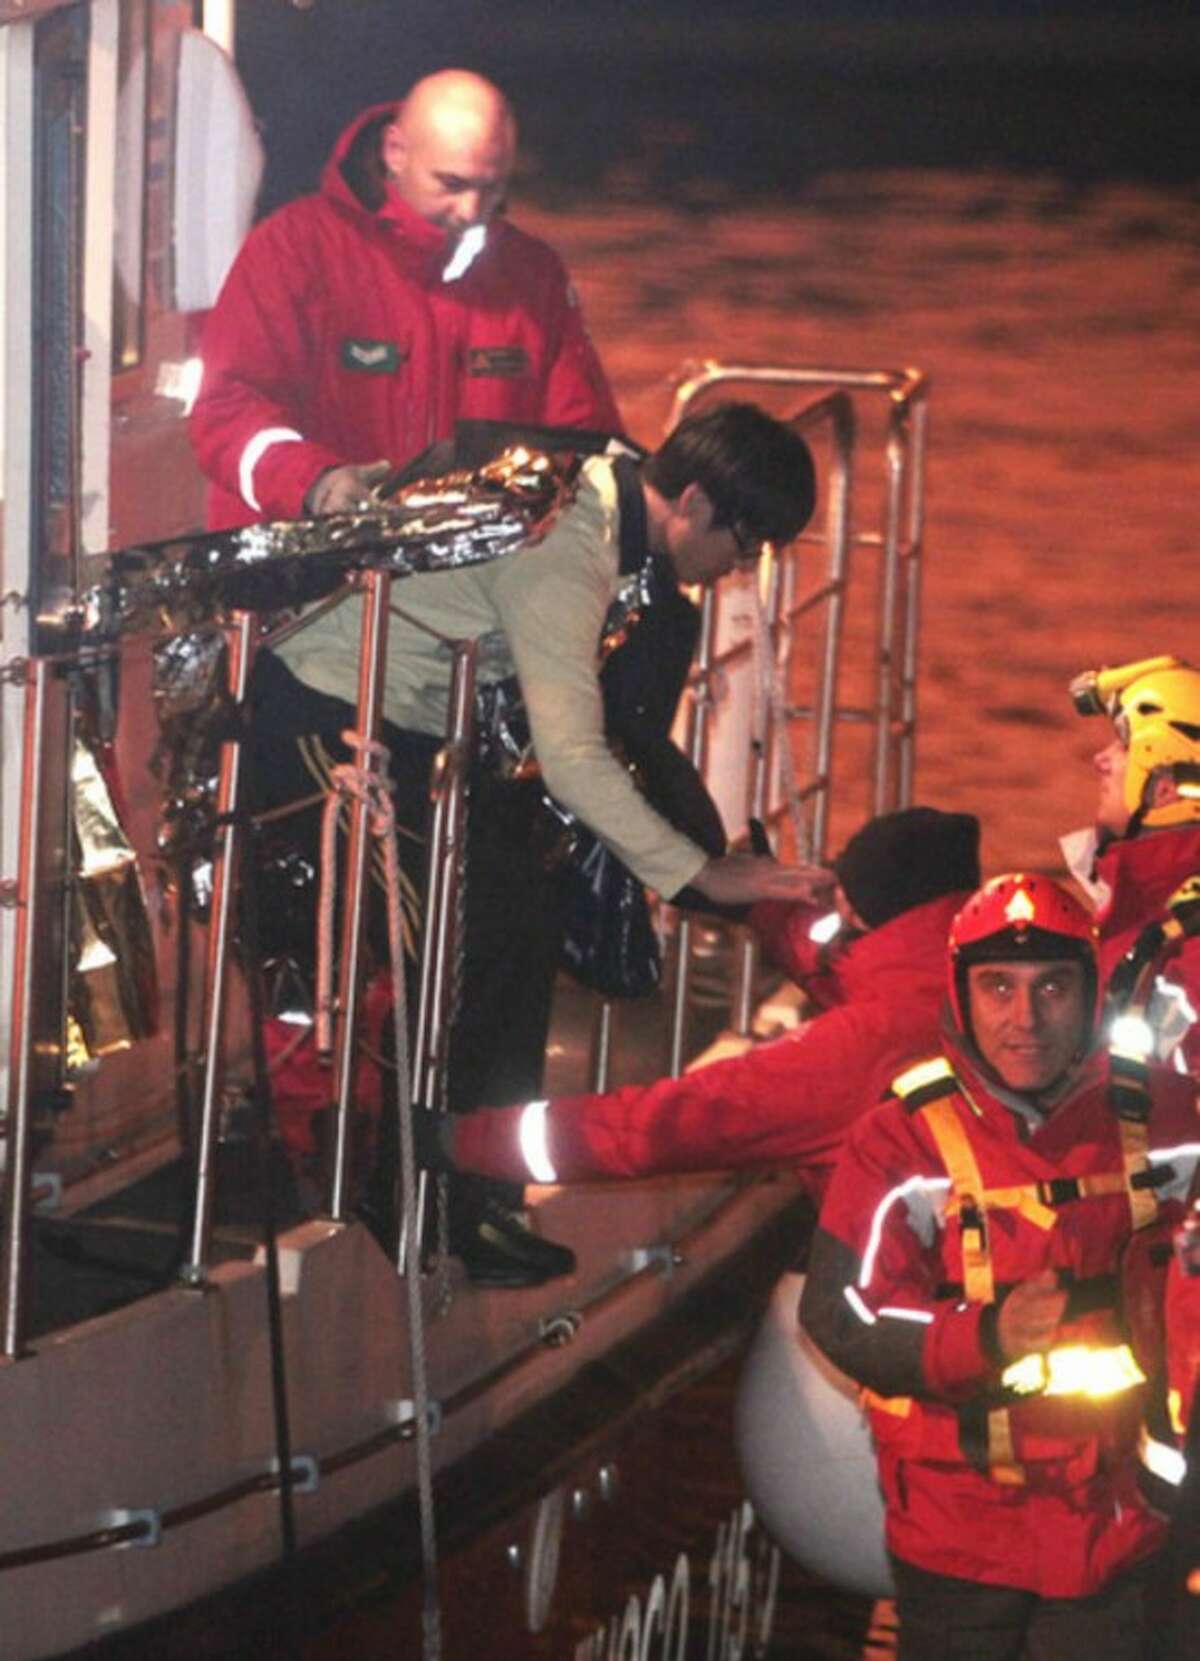 A passenger from South Korea, top left, disembarks from an Italian Firefighter boat after being rescued from the luxury cruise ship Costa Concordia which ran aground the tiny Tuscan island of Giglio, Italy, Sunday, Jan. 15, 2012. The luxury cruise ship ran aground off the coast of Tuscany, sending water pouring in through a 160-foot (50-meter) gash in the hull and forcing the evacuation of some 4,200 people from the listing vessel early Saturday, the Italian coast guard said. (AP Photo/Gregorio Borgia)